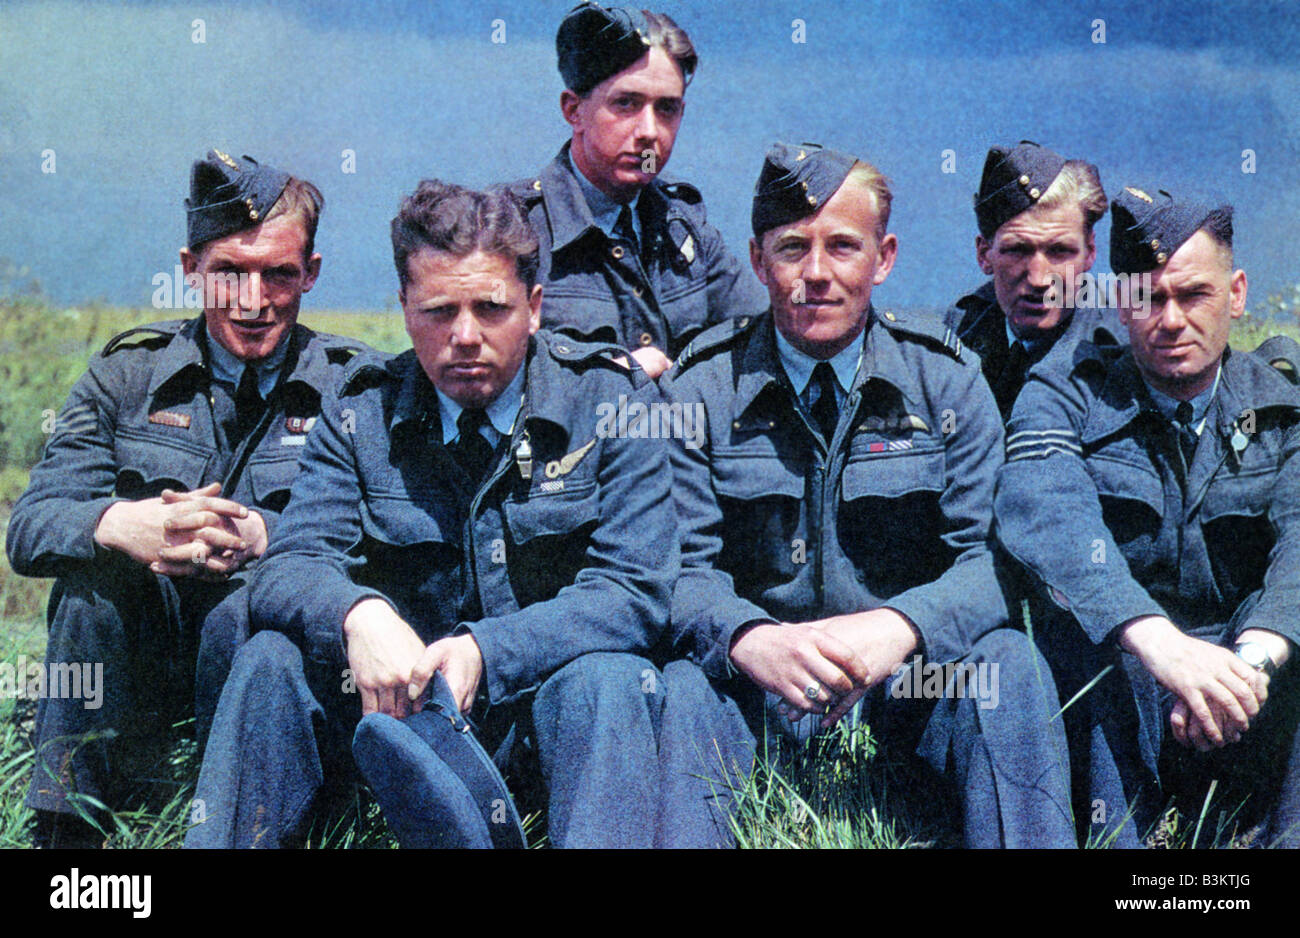 GUY PENROSE GIBSON VC and other members of RAF 617 Squadron shortly after the Dams Raid on 16 May 1943. Gibson second from left. Stock Photo